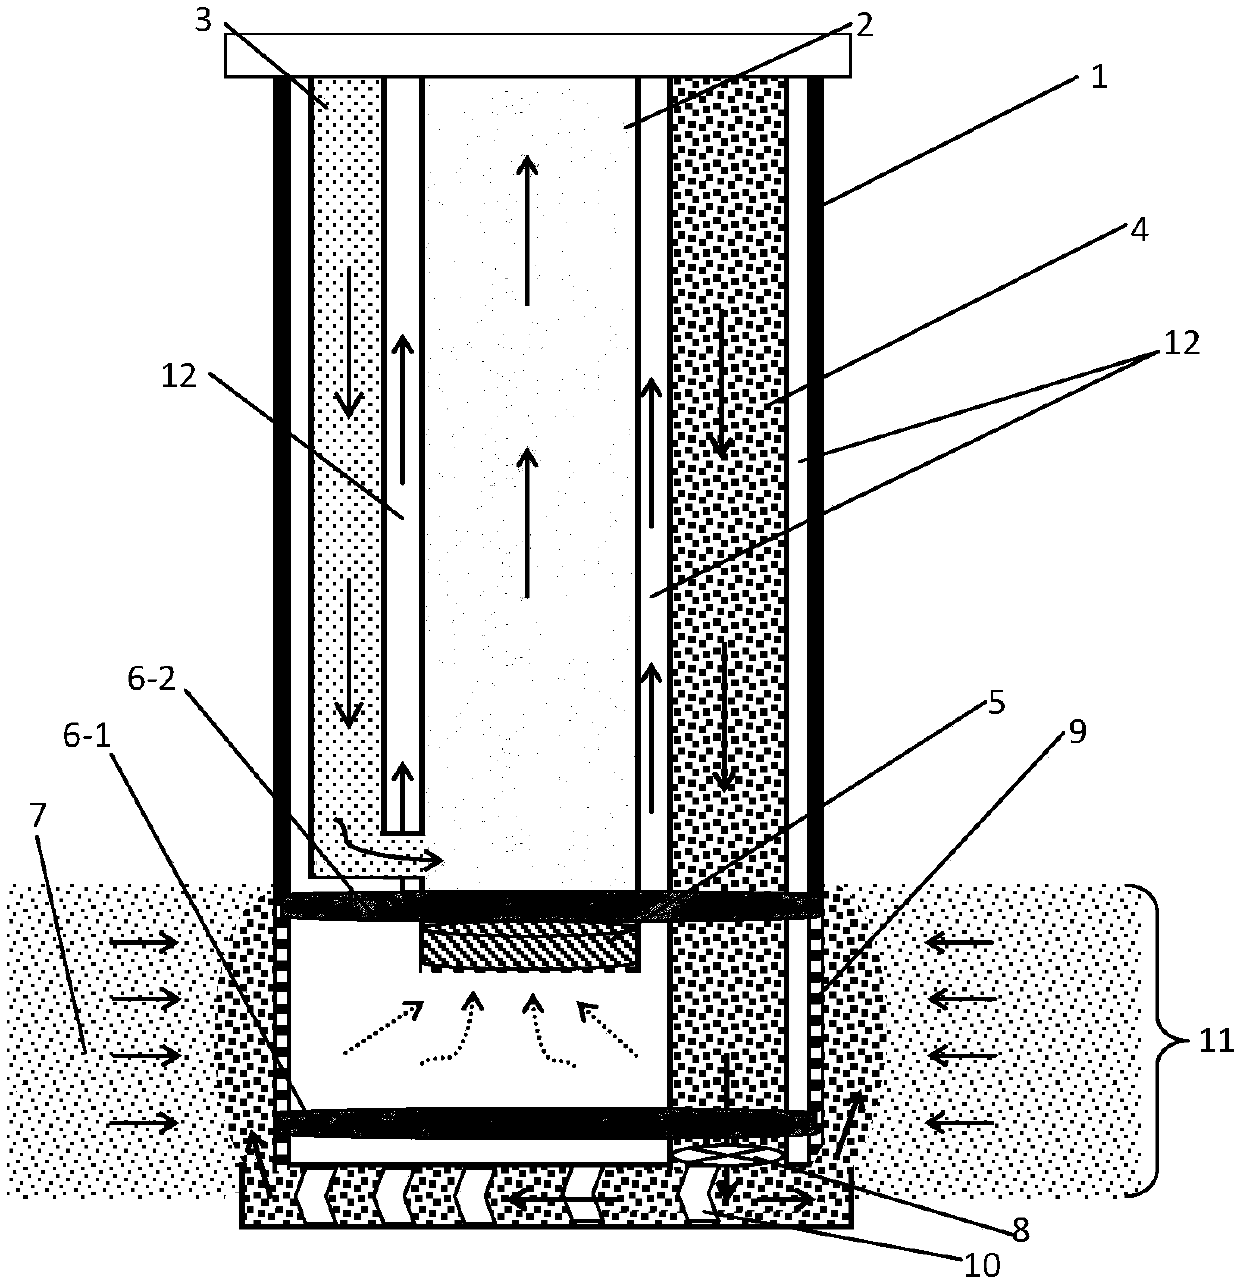 Marine gas hydrate and mortar replacement exploitation method and device